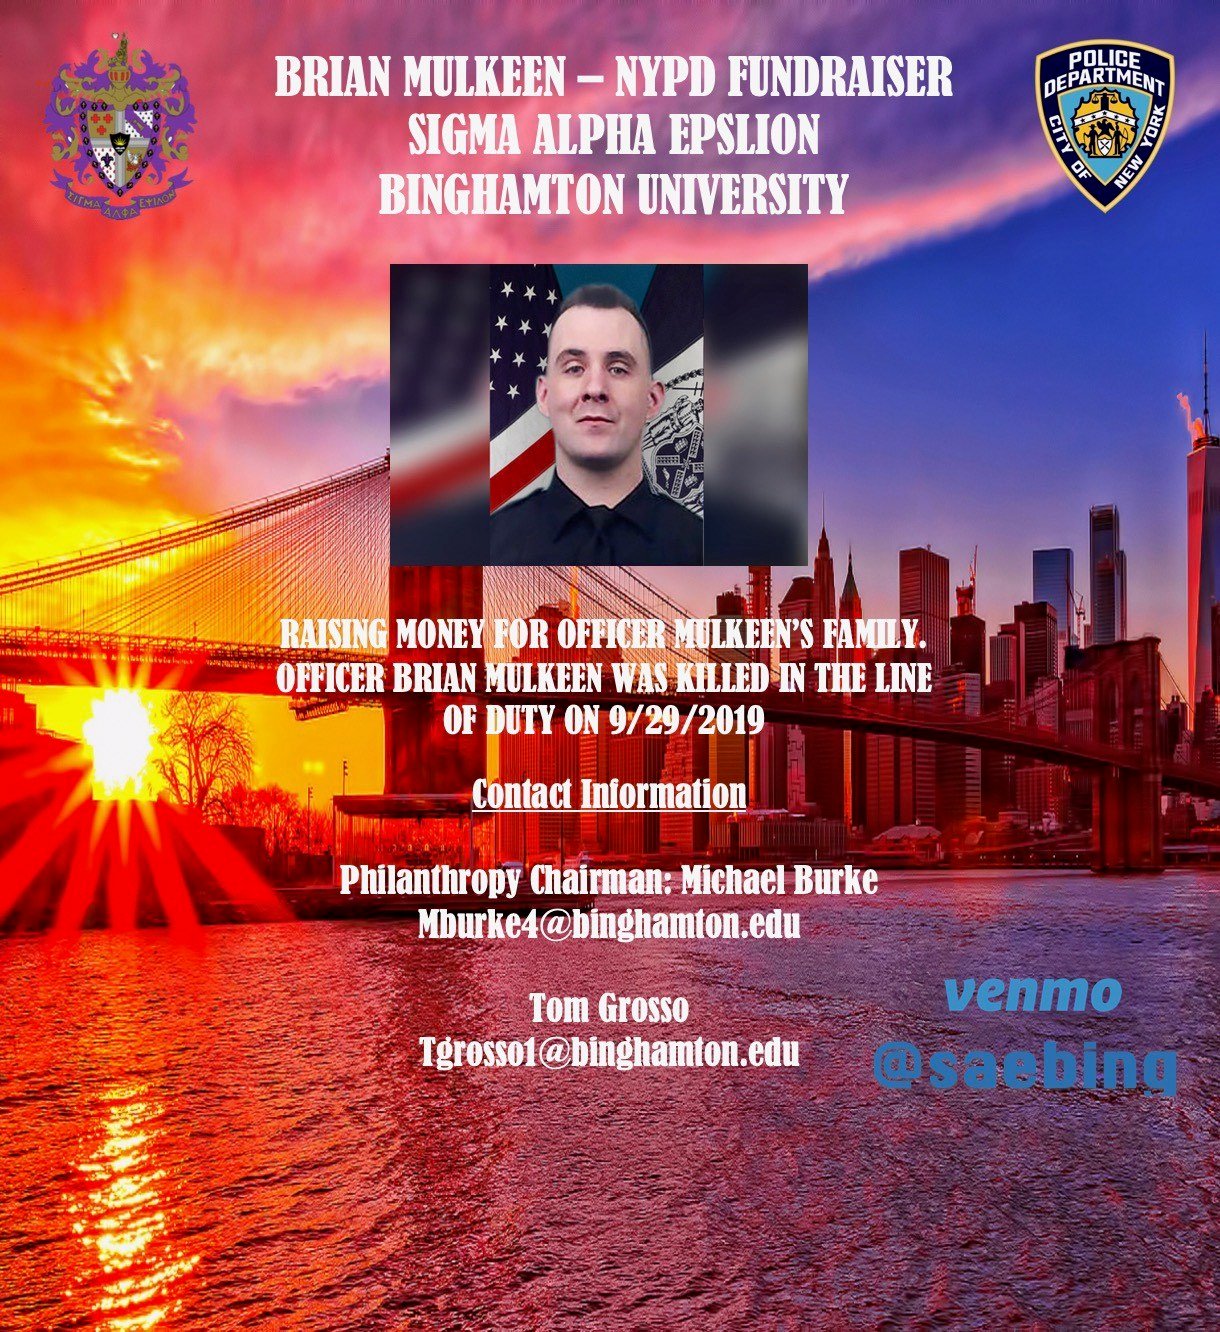 binghamton-university-students-raise-money-for-nypd-cop-killed-by-friendly-fire-wicz